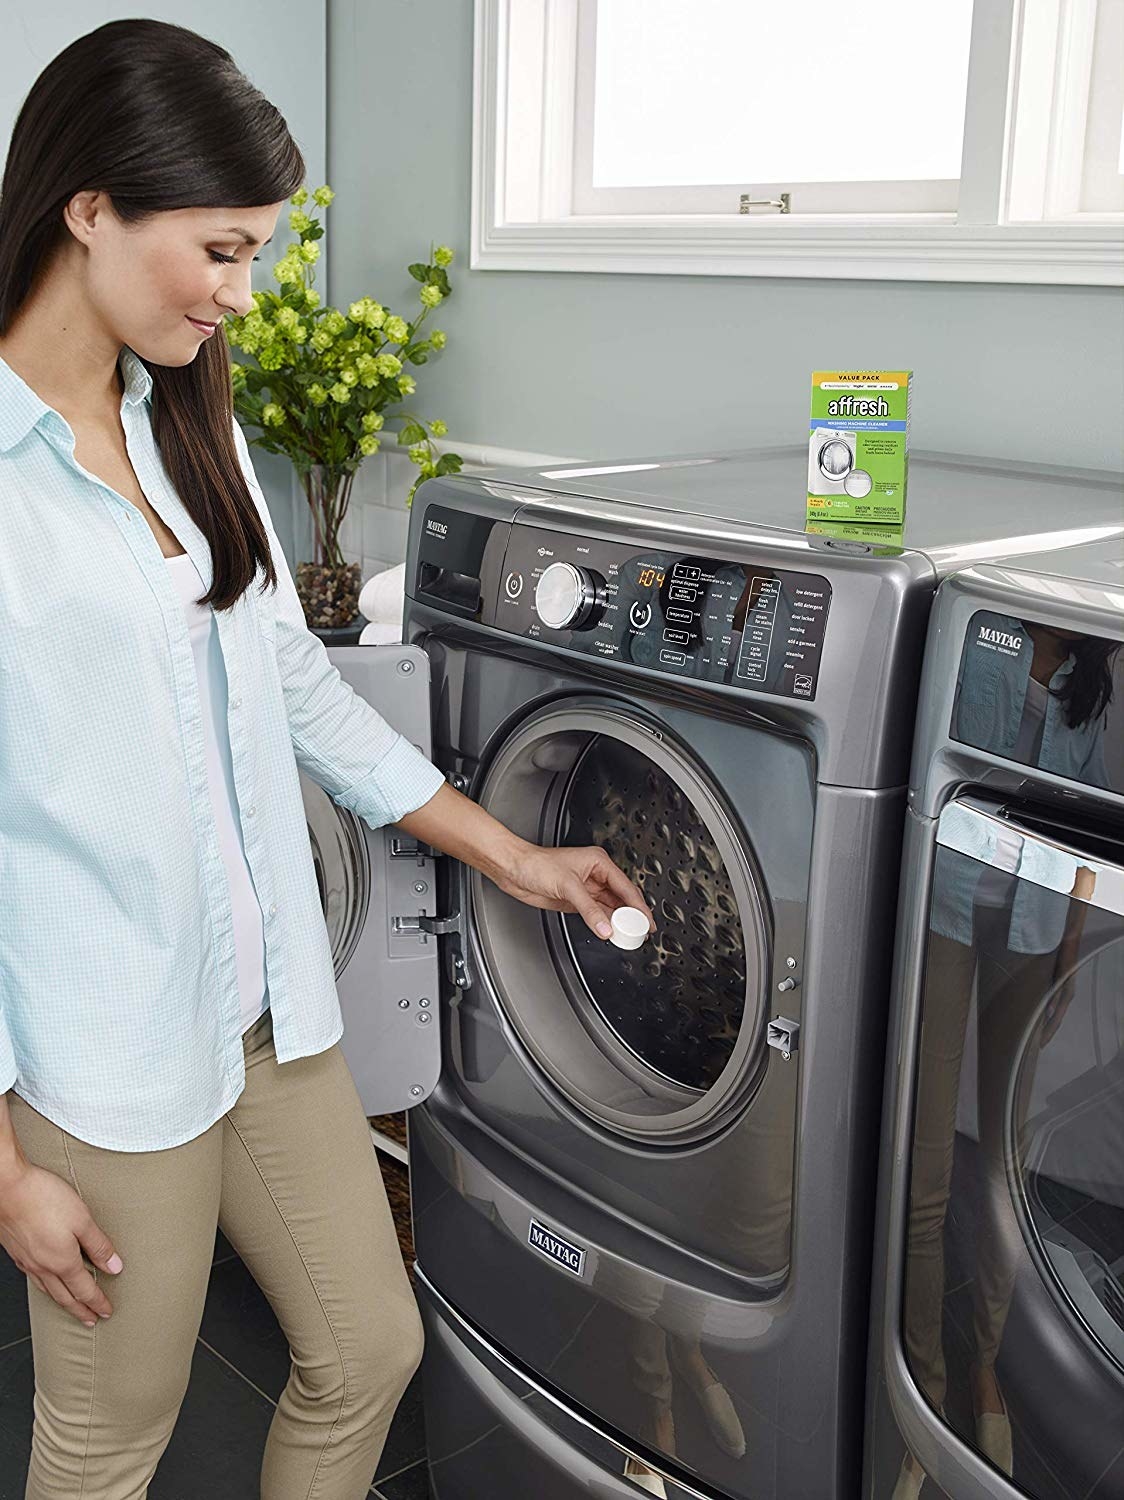 A model dropping the tablet in a washing machine